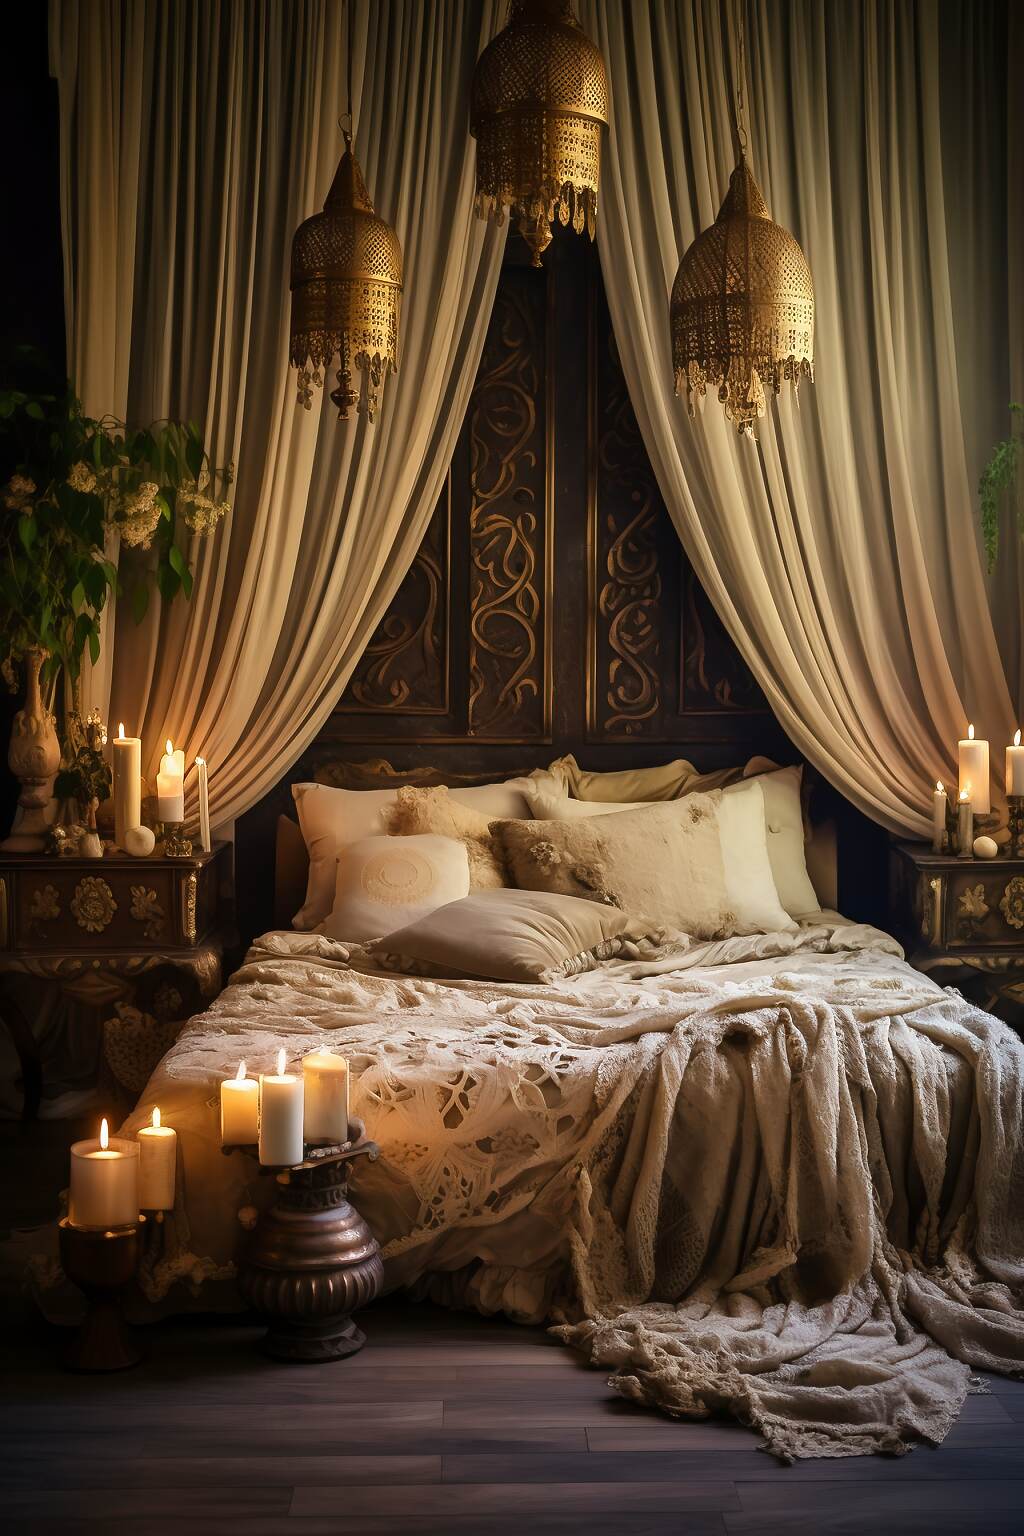 Spacious Dark Boho Bedroom With A Gold &Amp; Cream Color Scheme, Featuring Vintage Furniture, Lace Curtains, And Classic Art, Creating A Refined And Elegant Atmosphere.